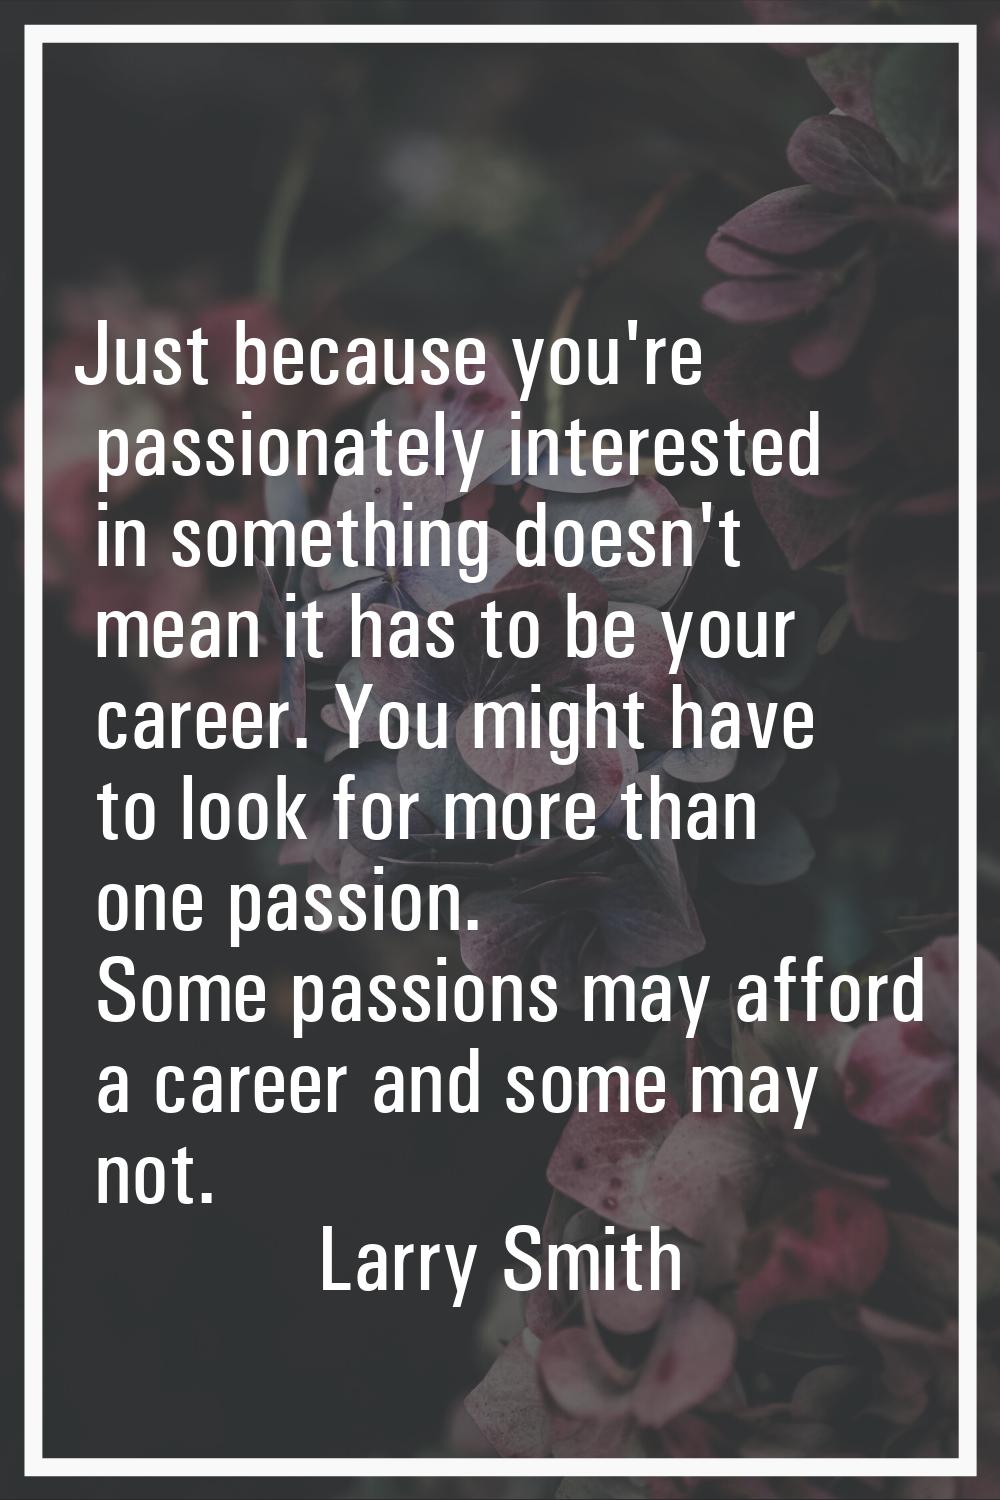 Just because you're passionately interested in something doesn't mean it has to be your career. You